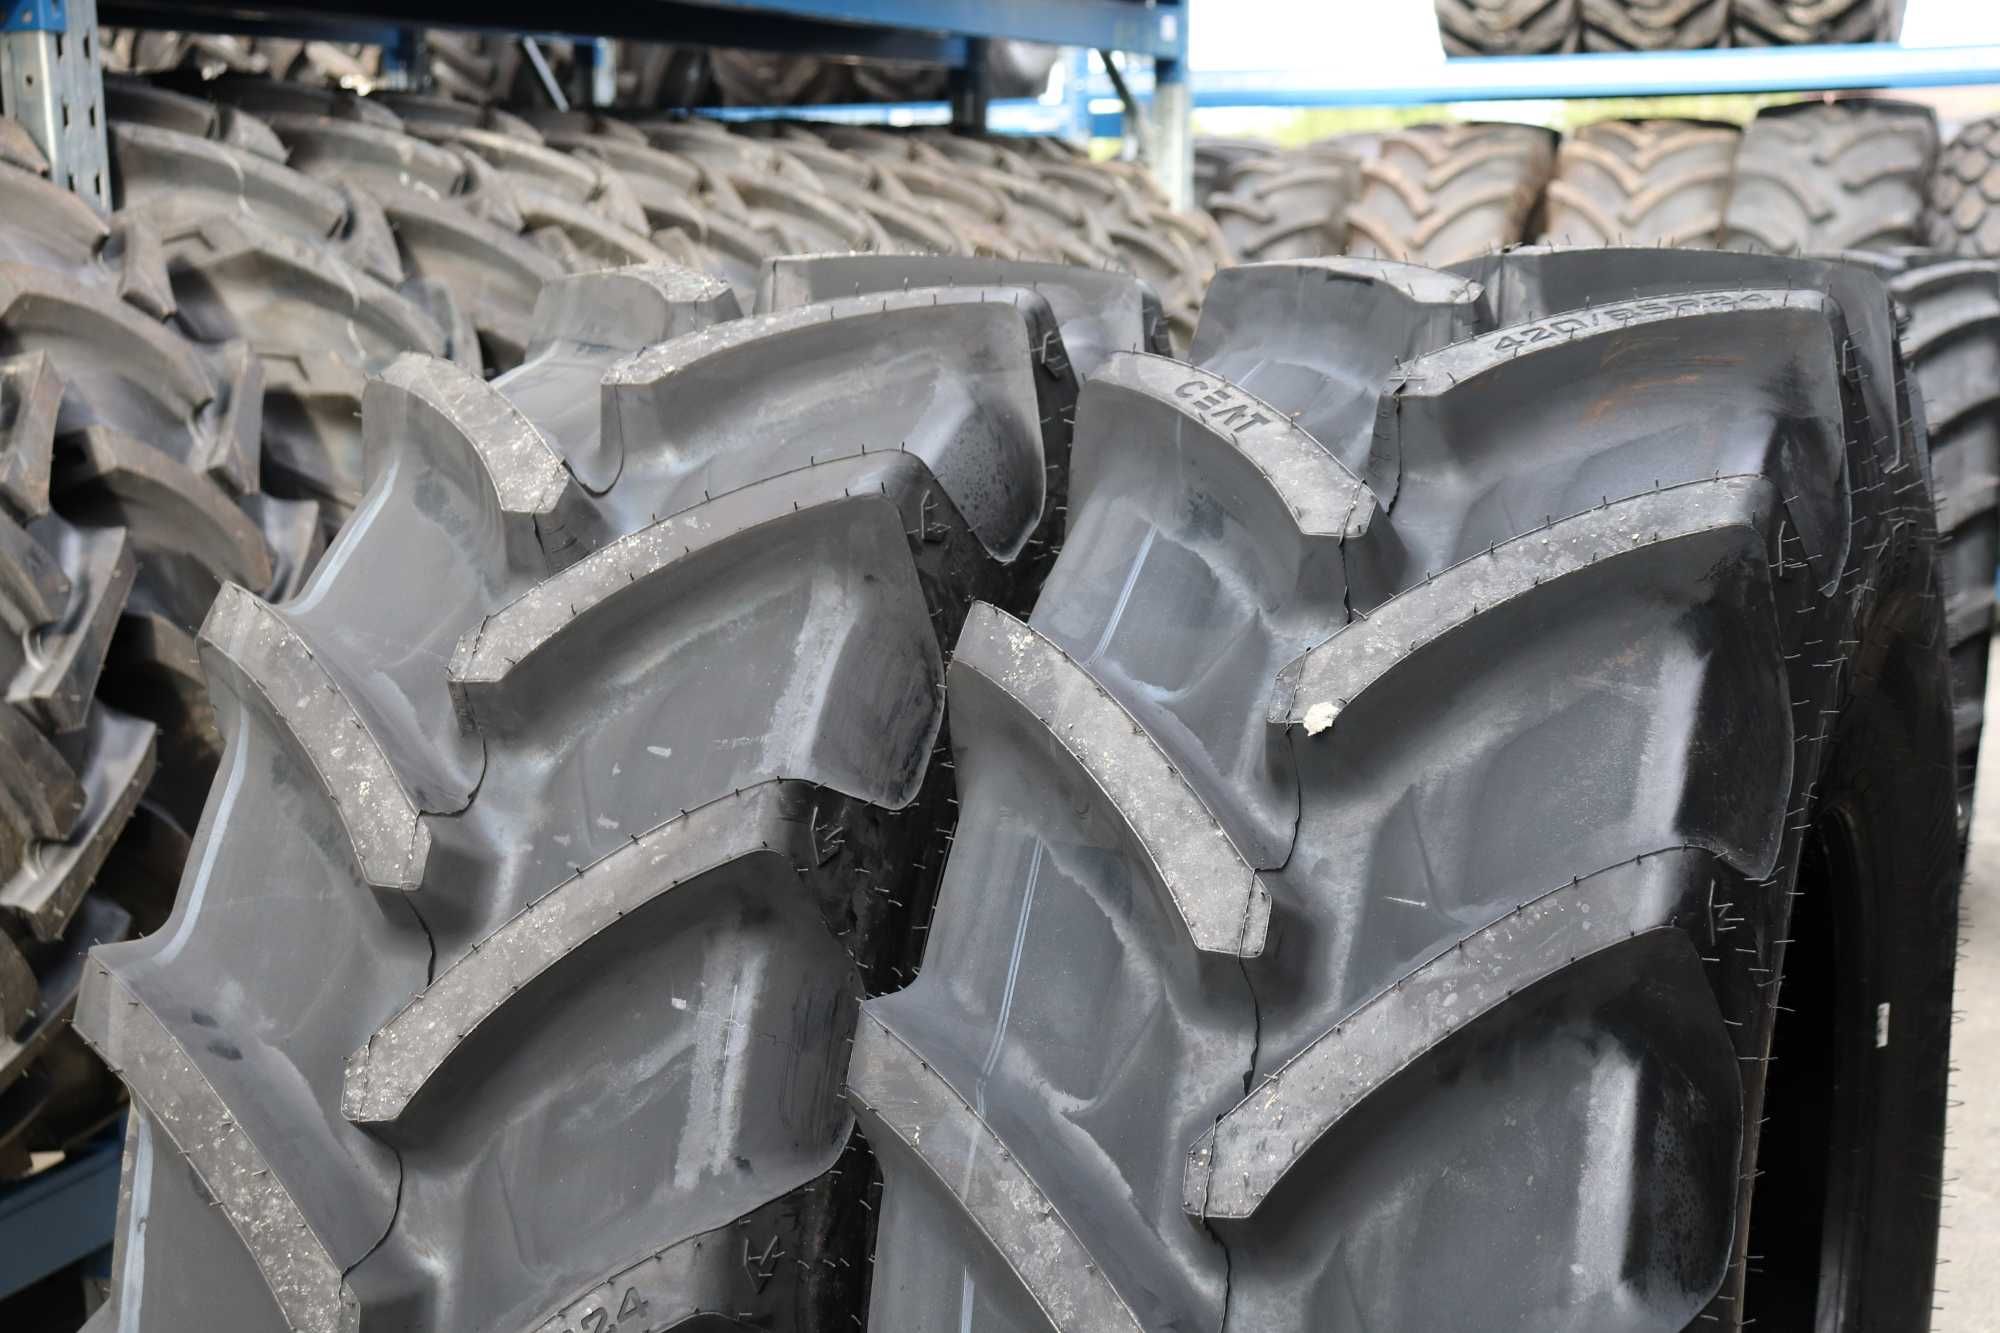 420/85R24 Ceat anvelope agricole radiale de tractor fata